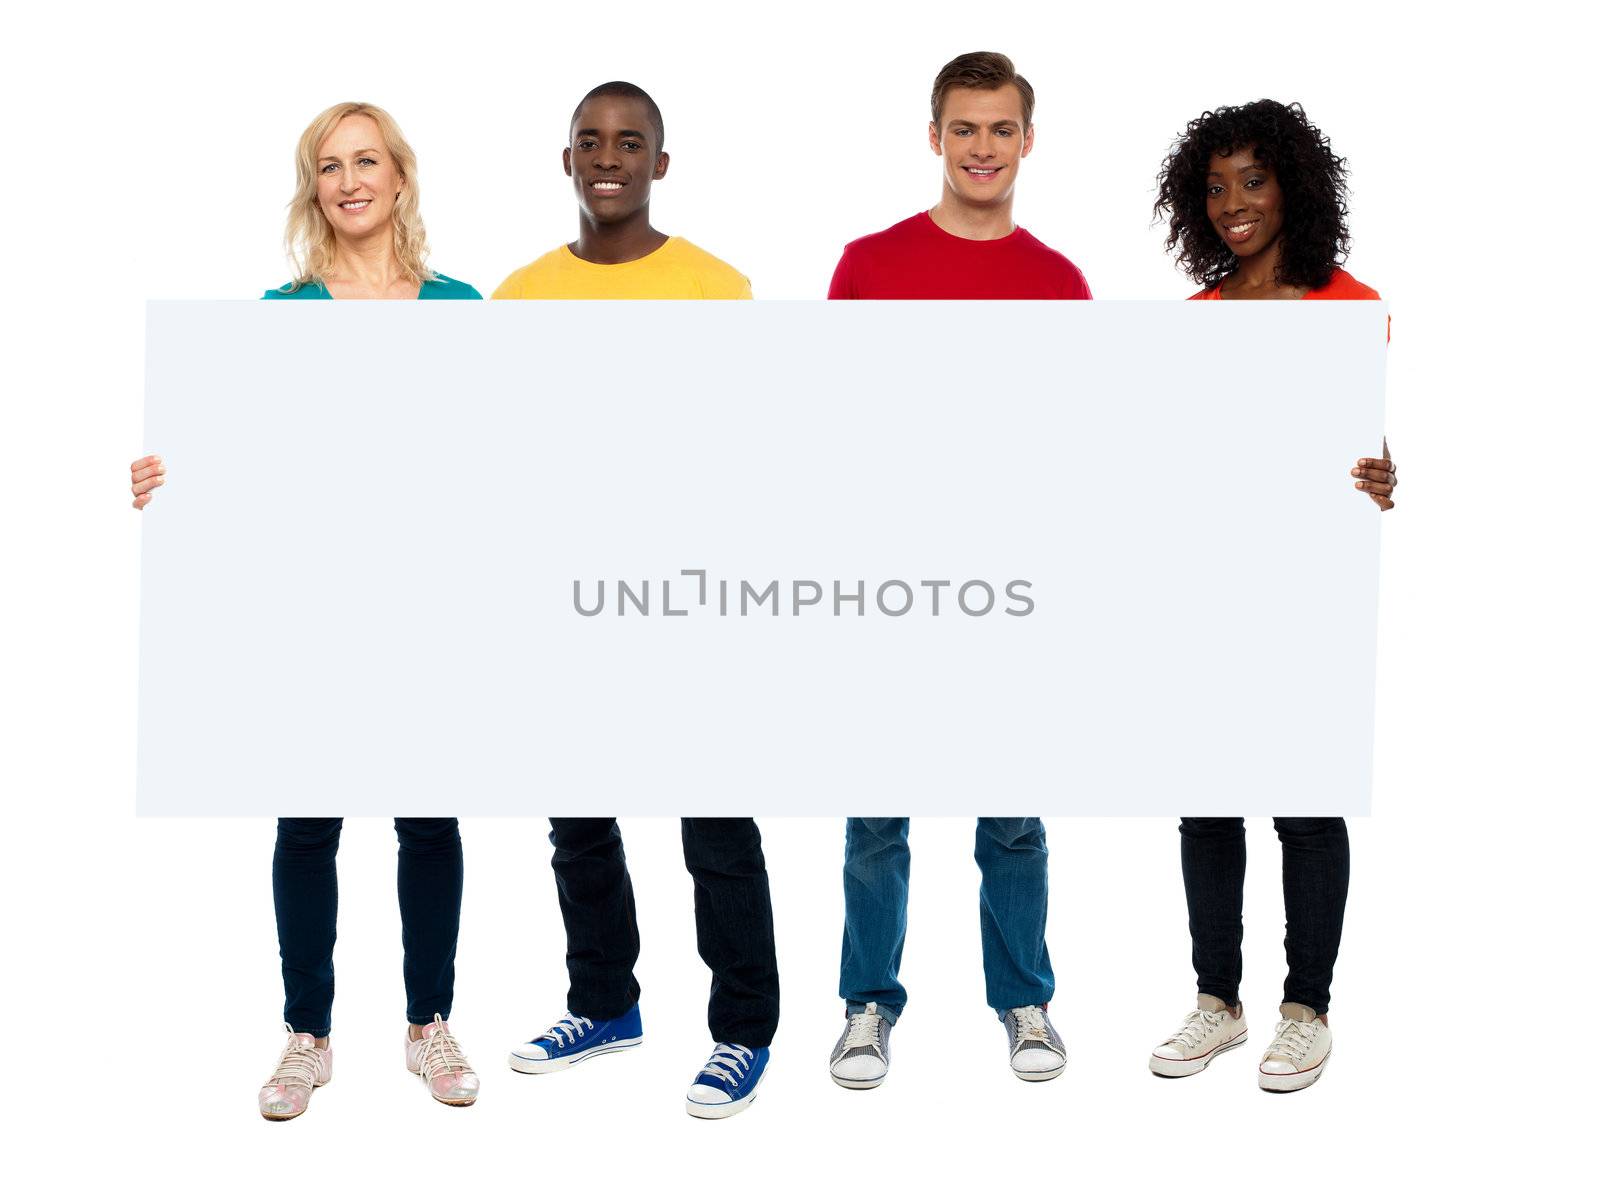 Confident young group showing blank poster, full length portrait